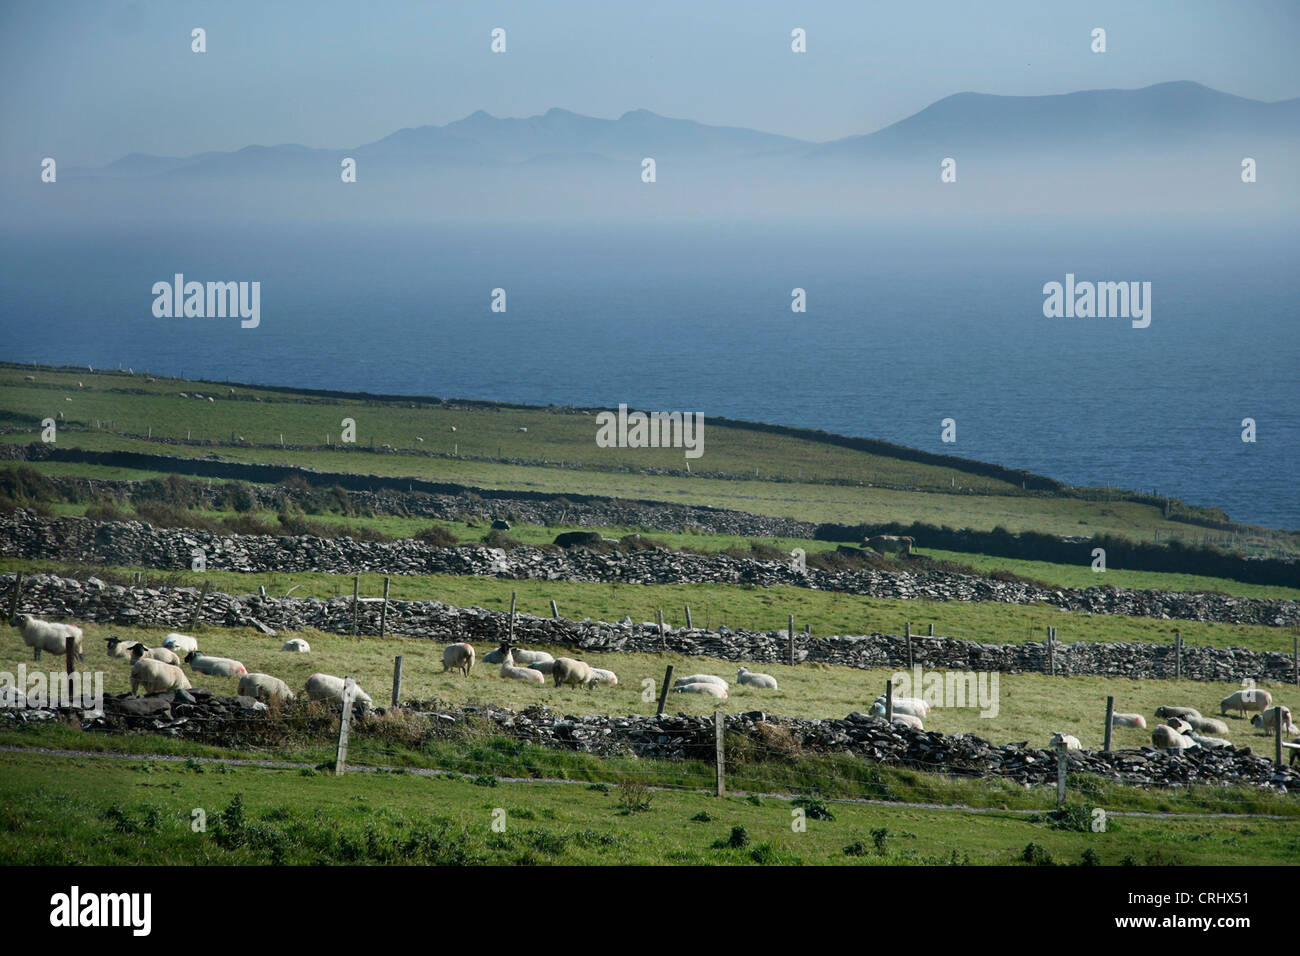 A view of the Iveragh Peninsula from Dingle, Co. Kerry, Ireland. Stock Photo